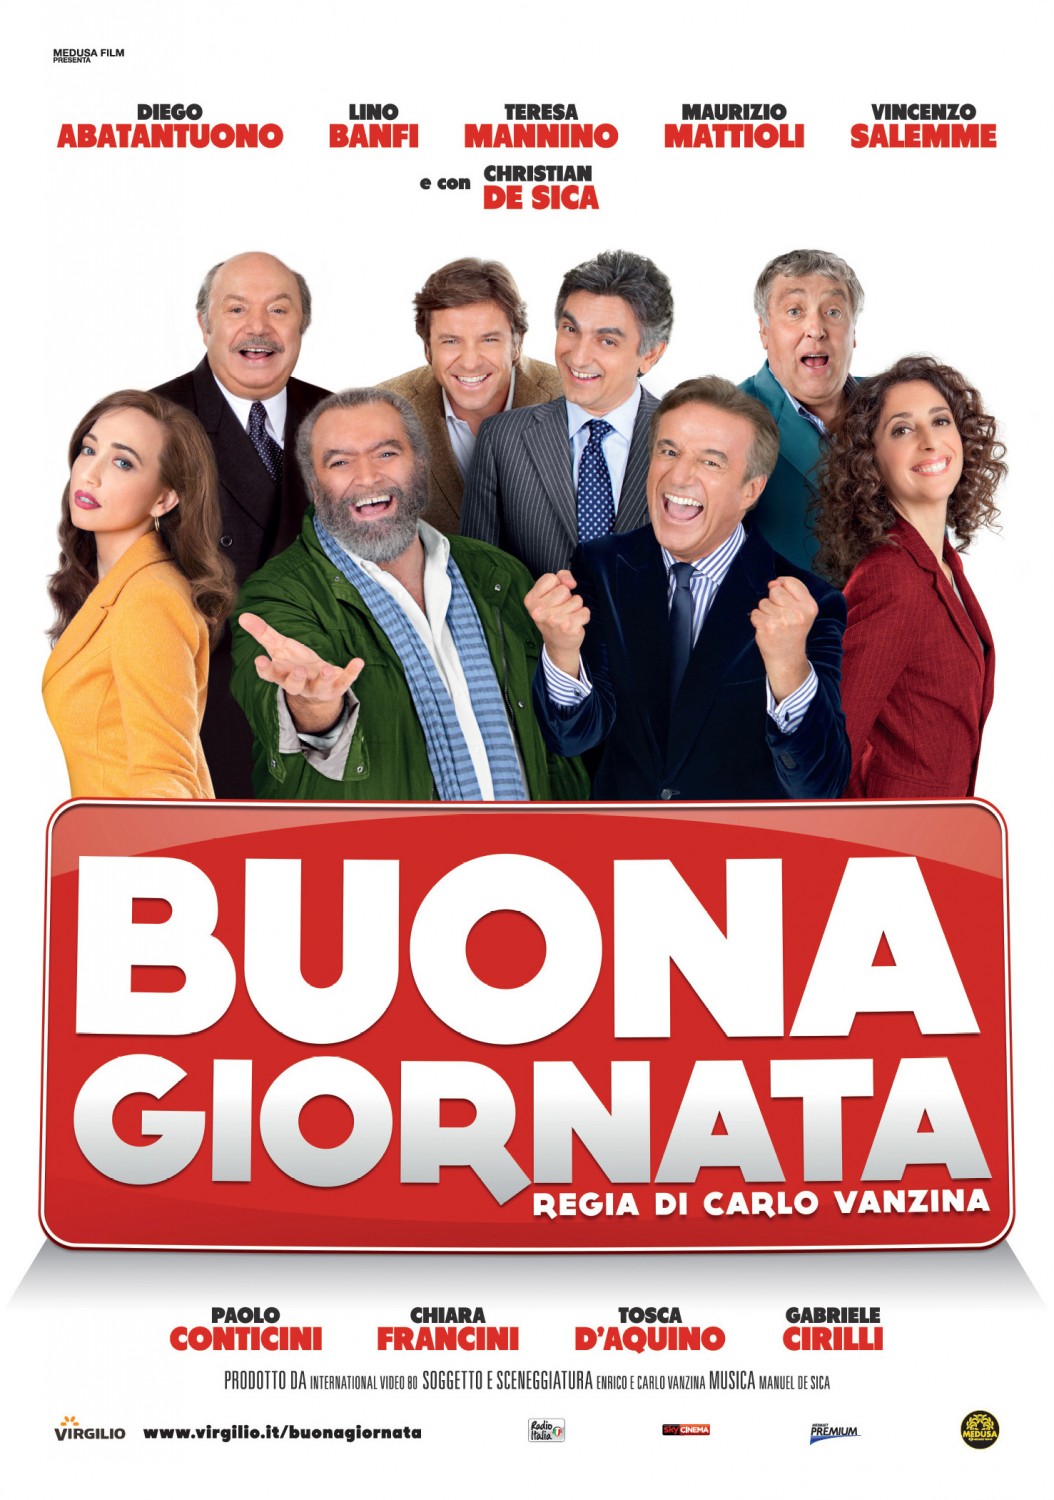 Extra Large Movie Poster Image for Buona giornata 